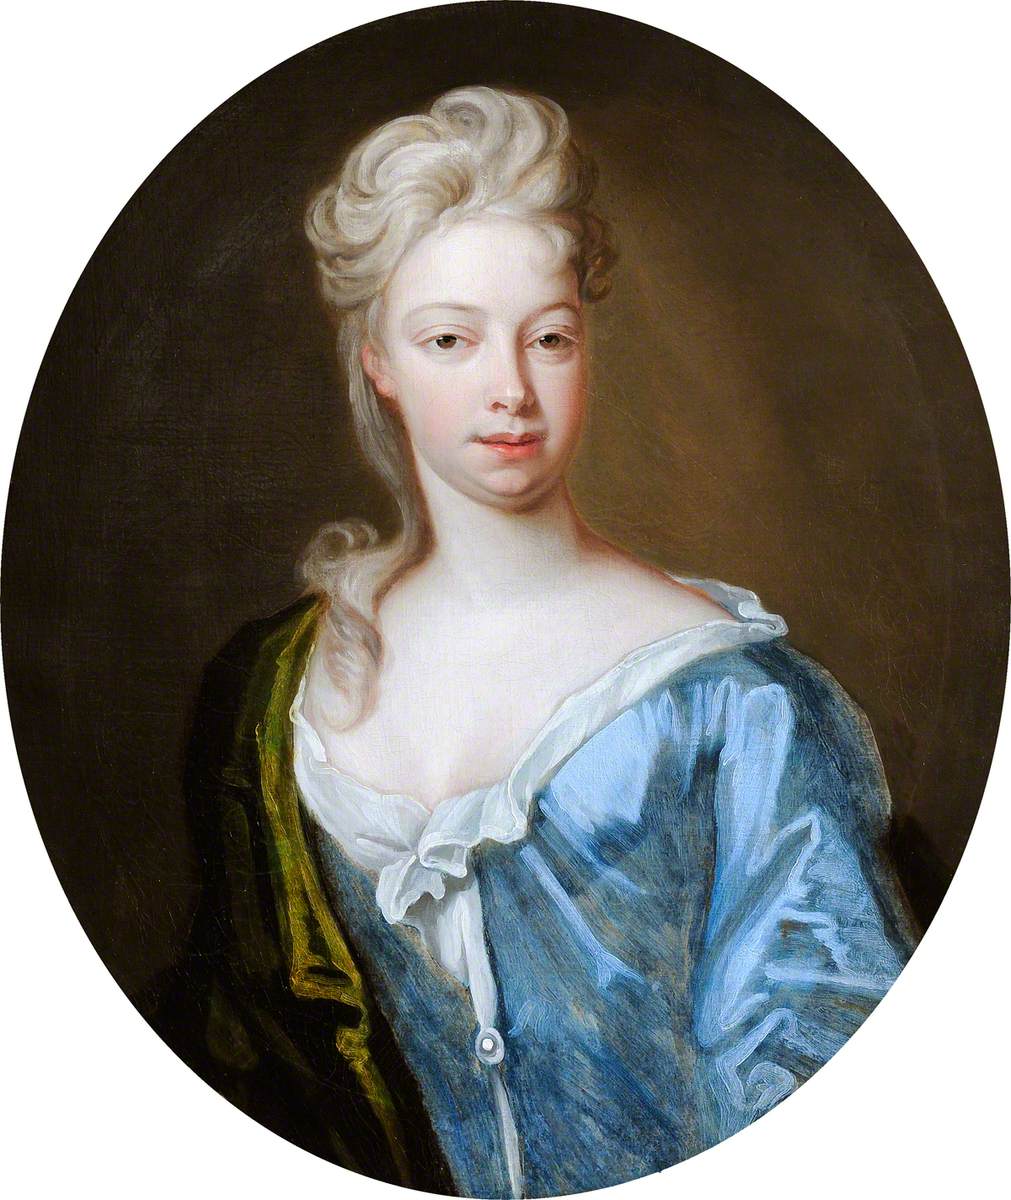 Portrait of an Unknown Young Woman in a Blue Dress and Green Mantle